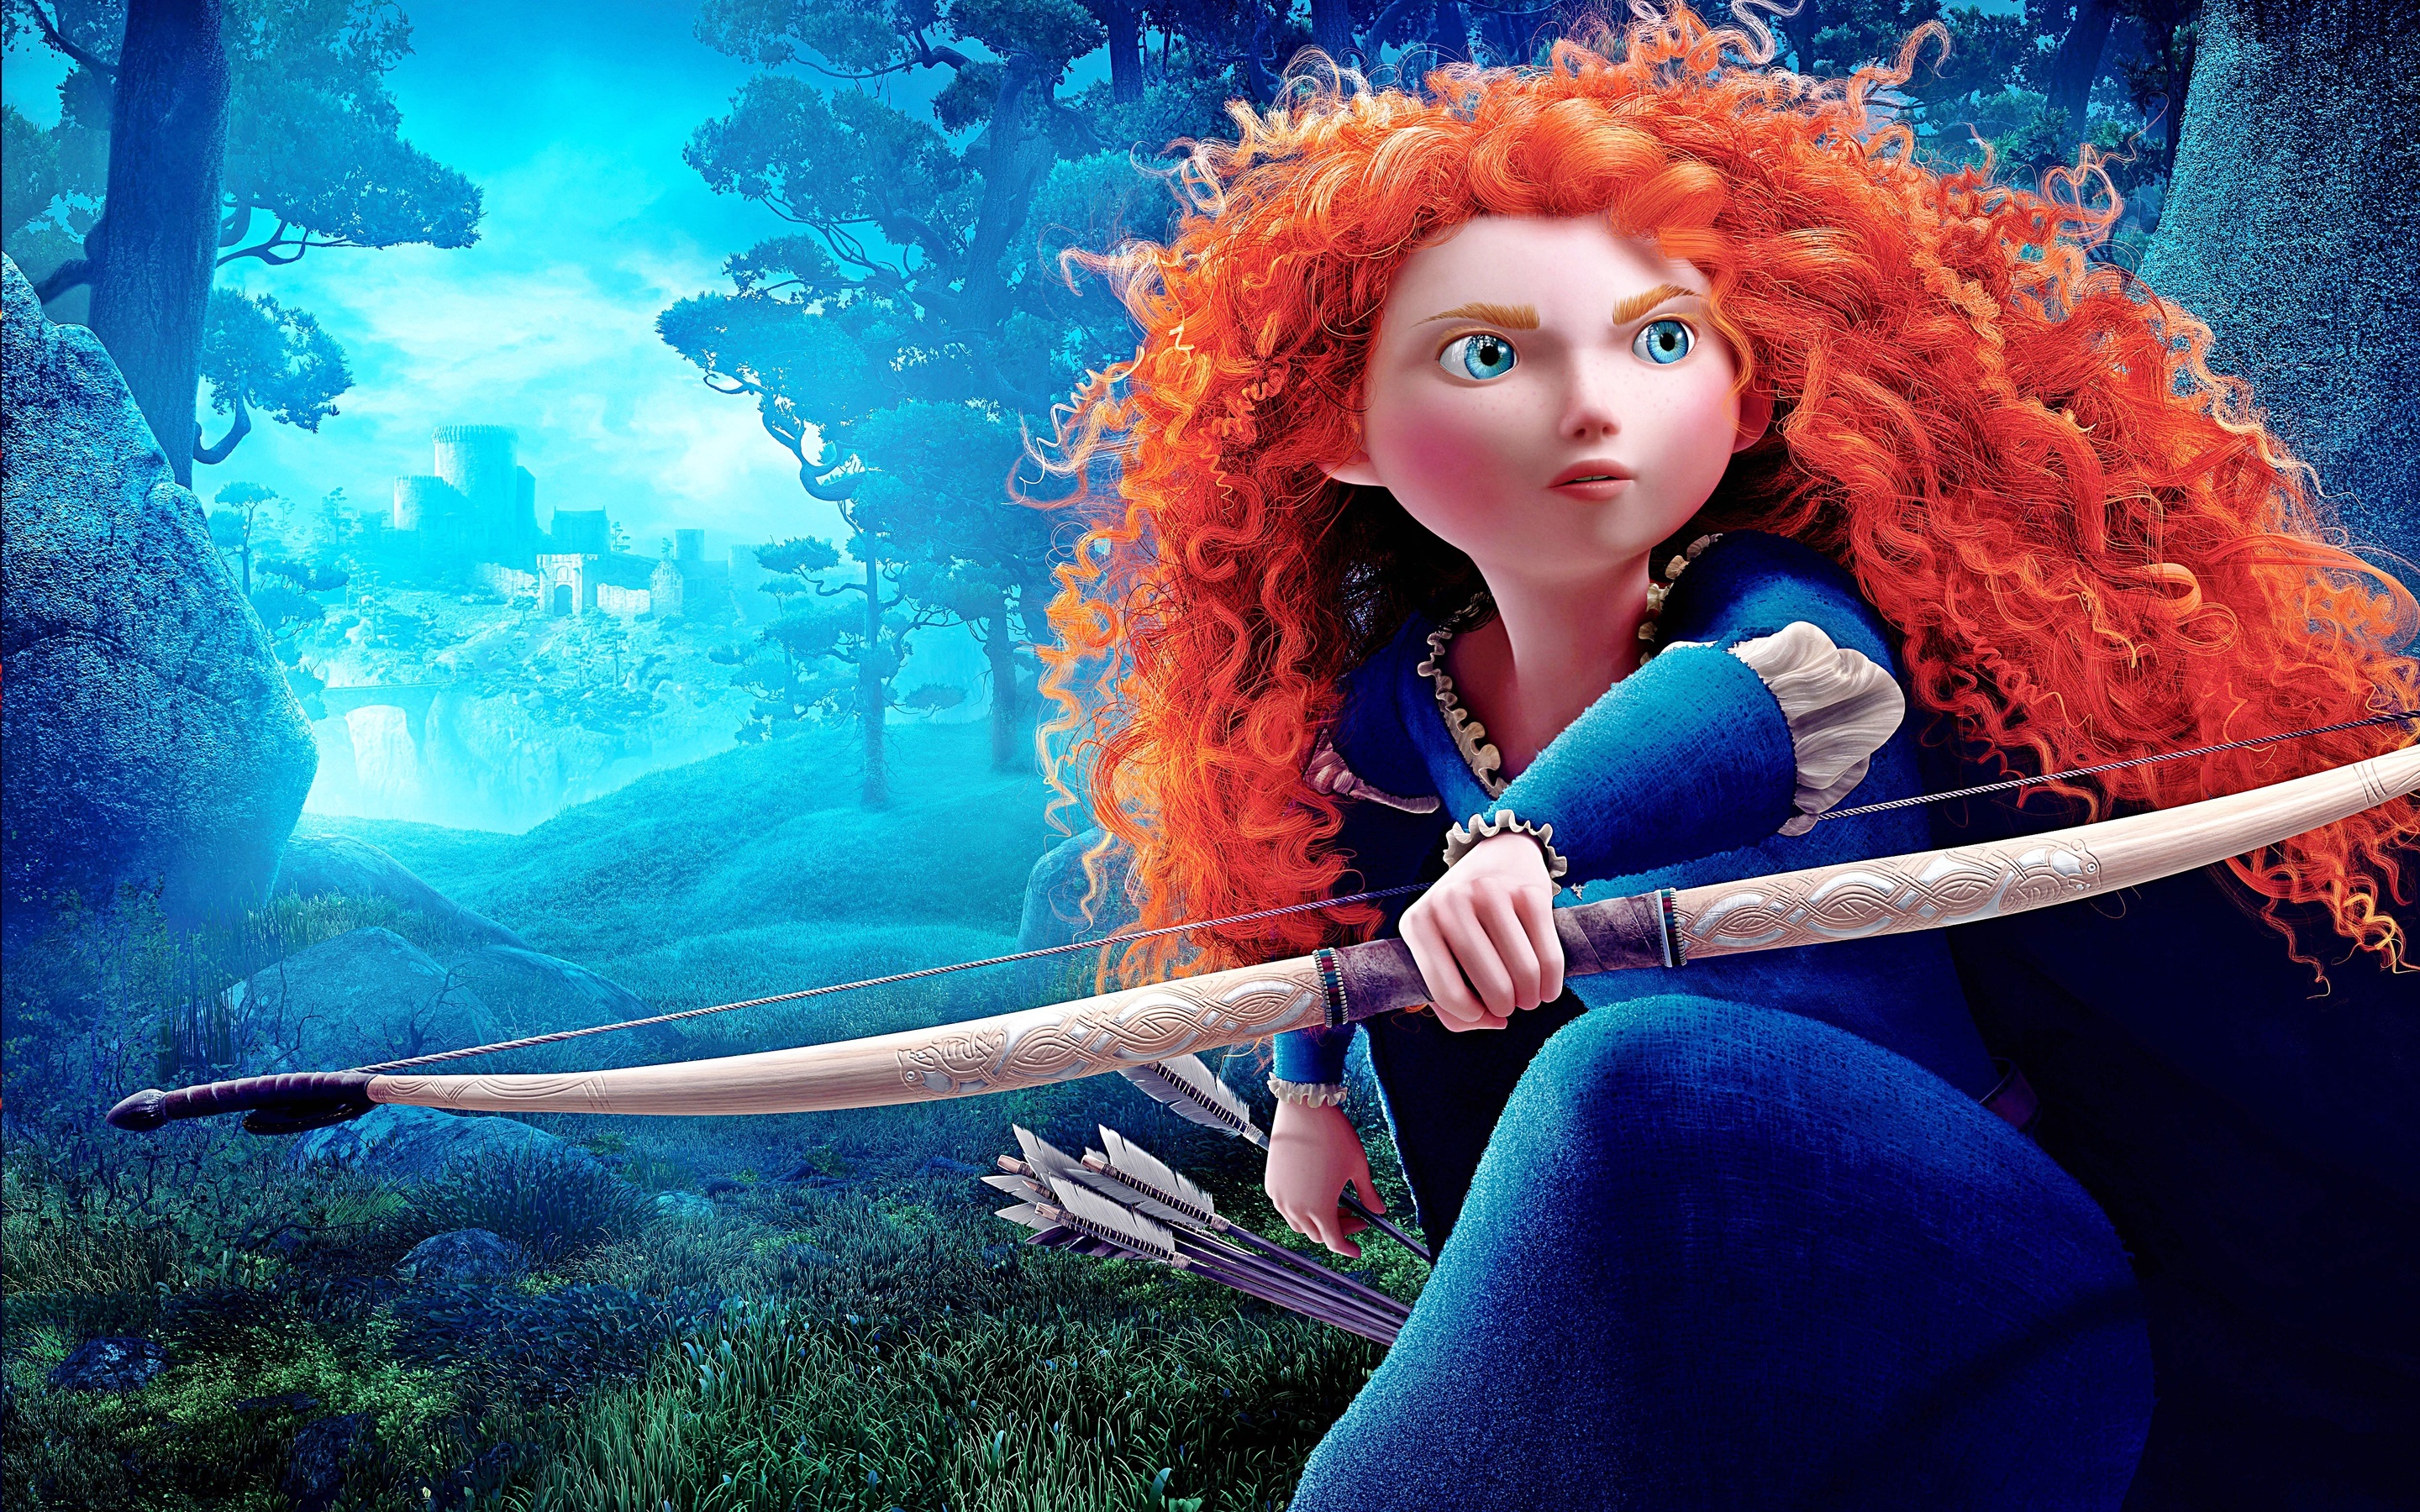 Brave (Disney): Directed by Mark Andrews and Brenda Chapman. 2880x1800 HD Wallpaper.